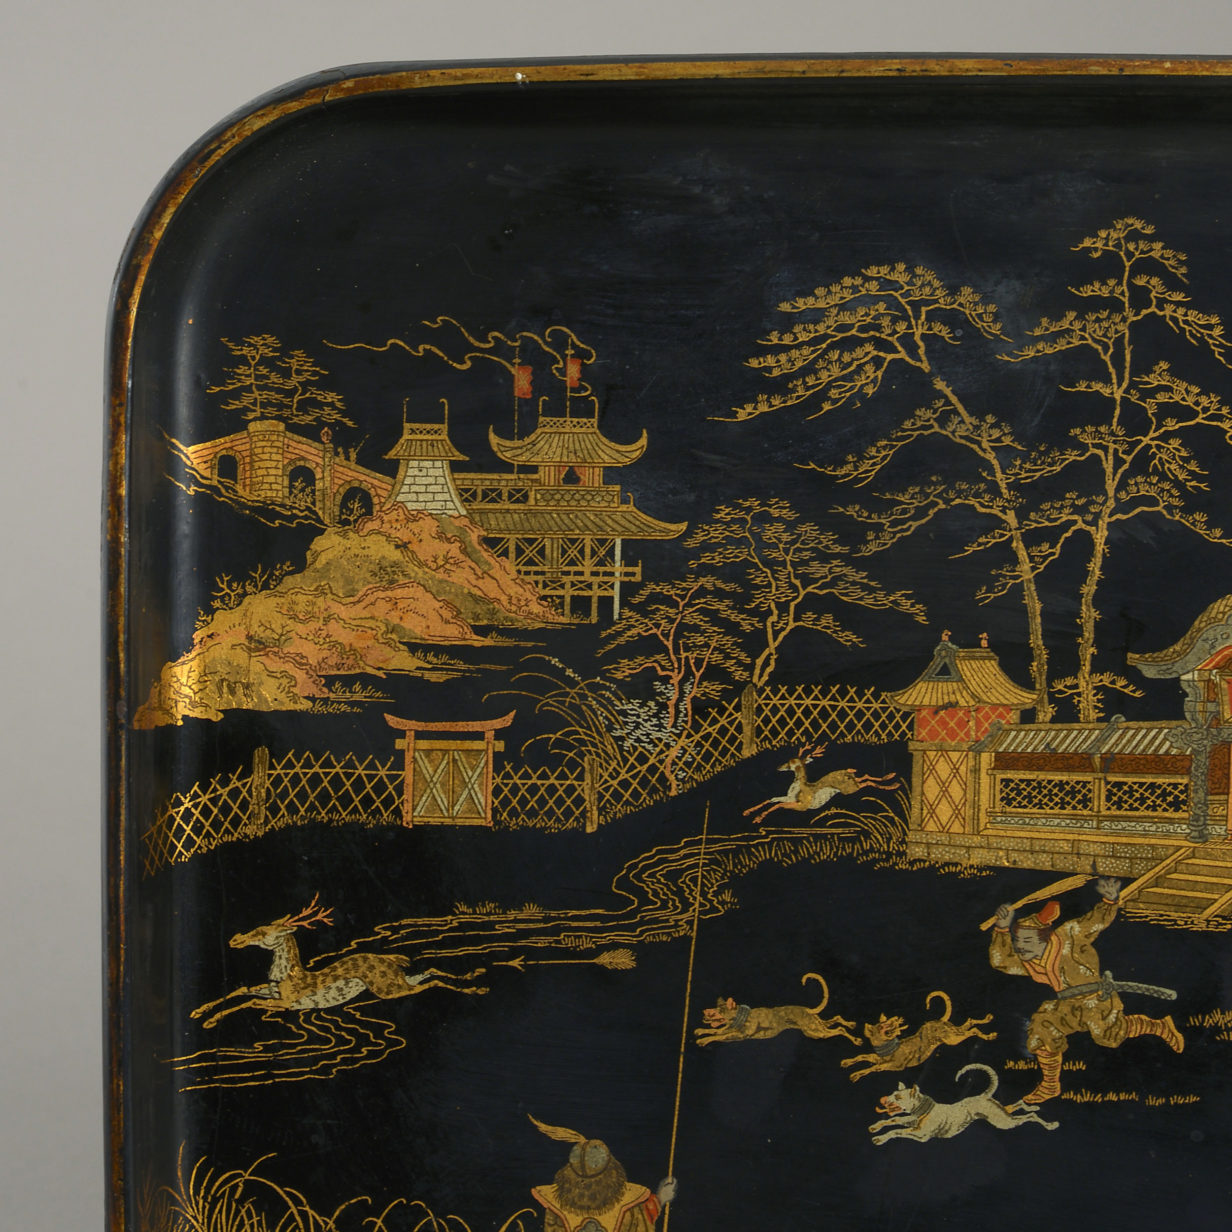 A black and gold lacquer tray